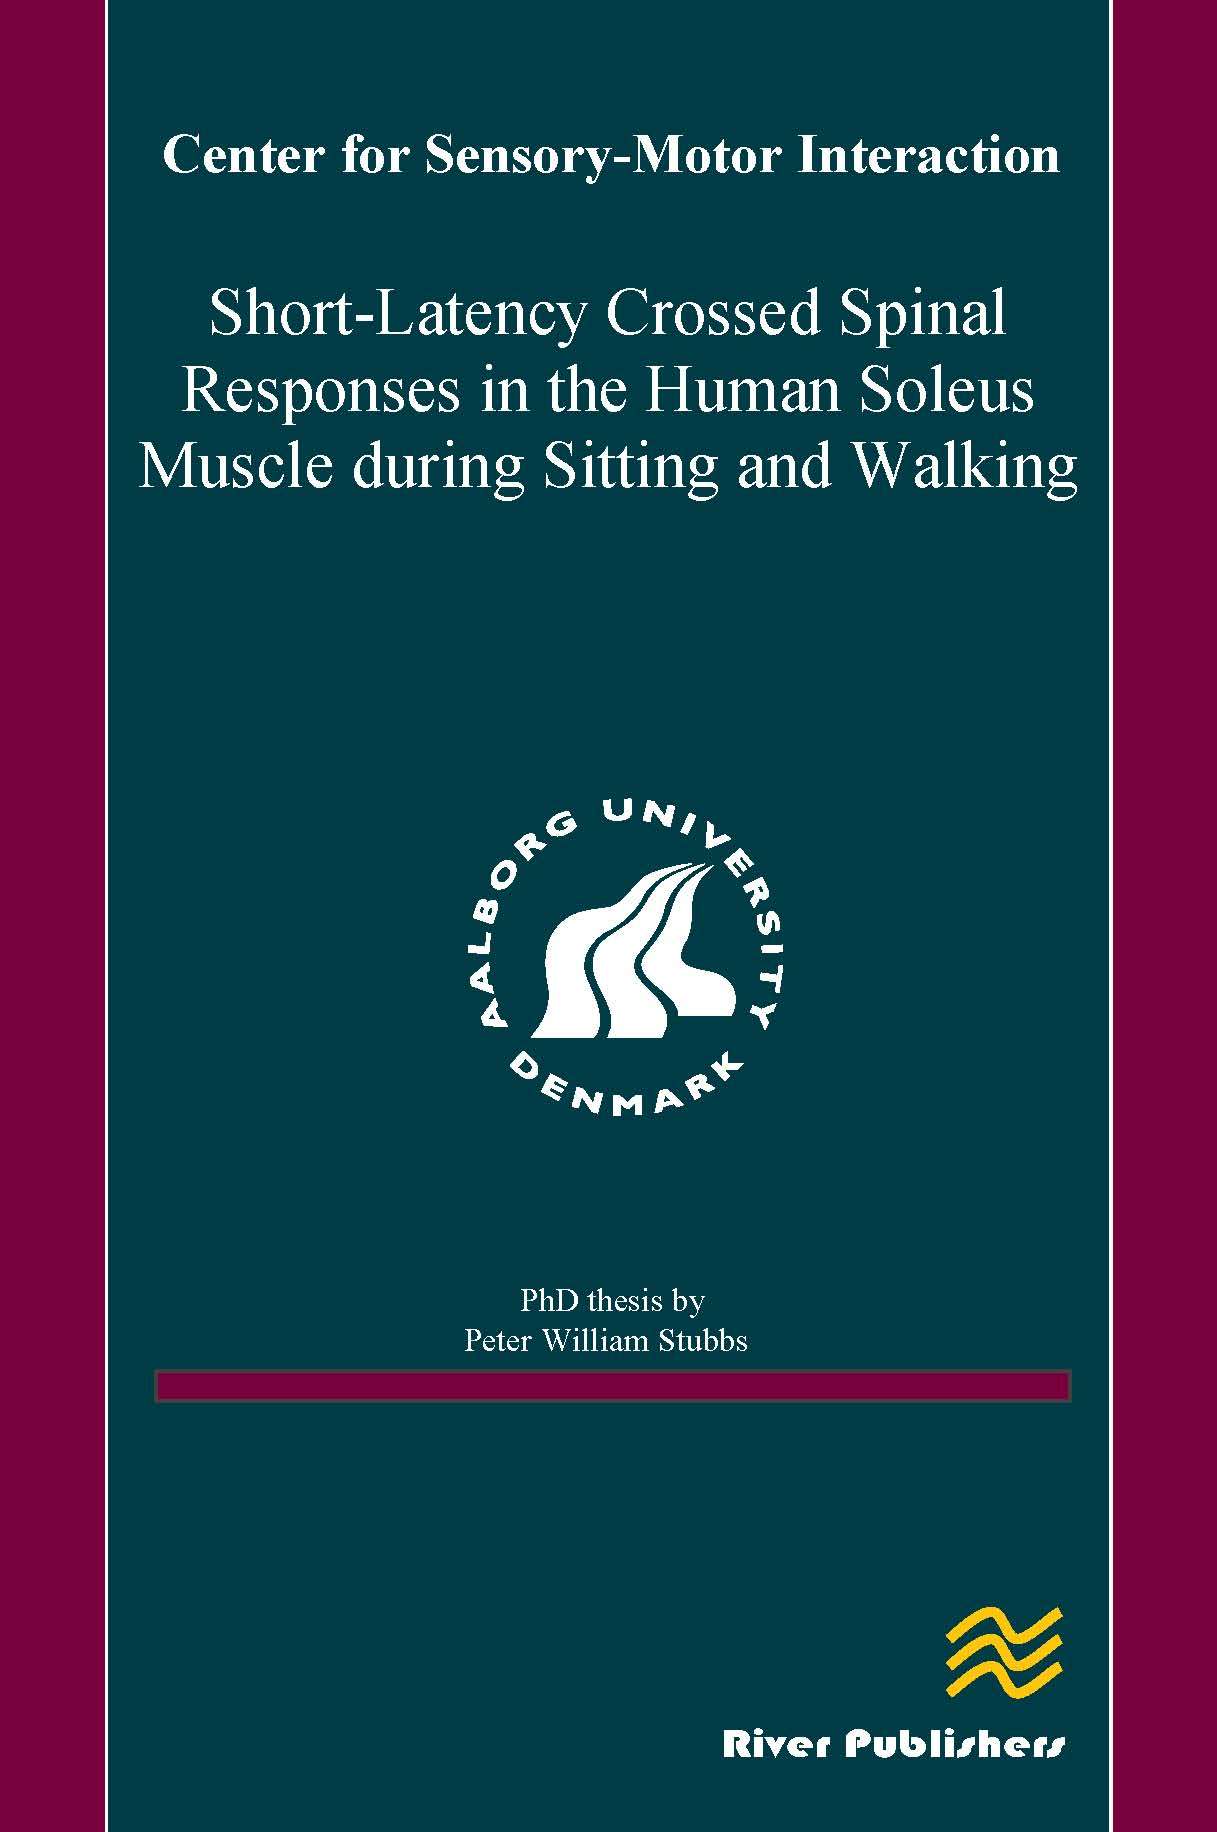 Short-Latency Crossed Spinal Responses in the Human Soleus Muscle during Sitting and Walking